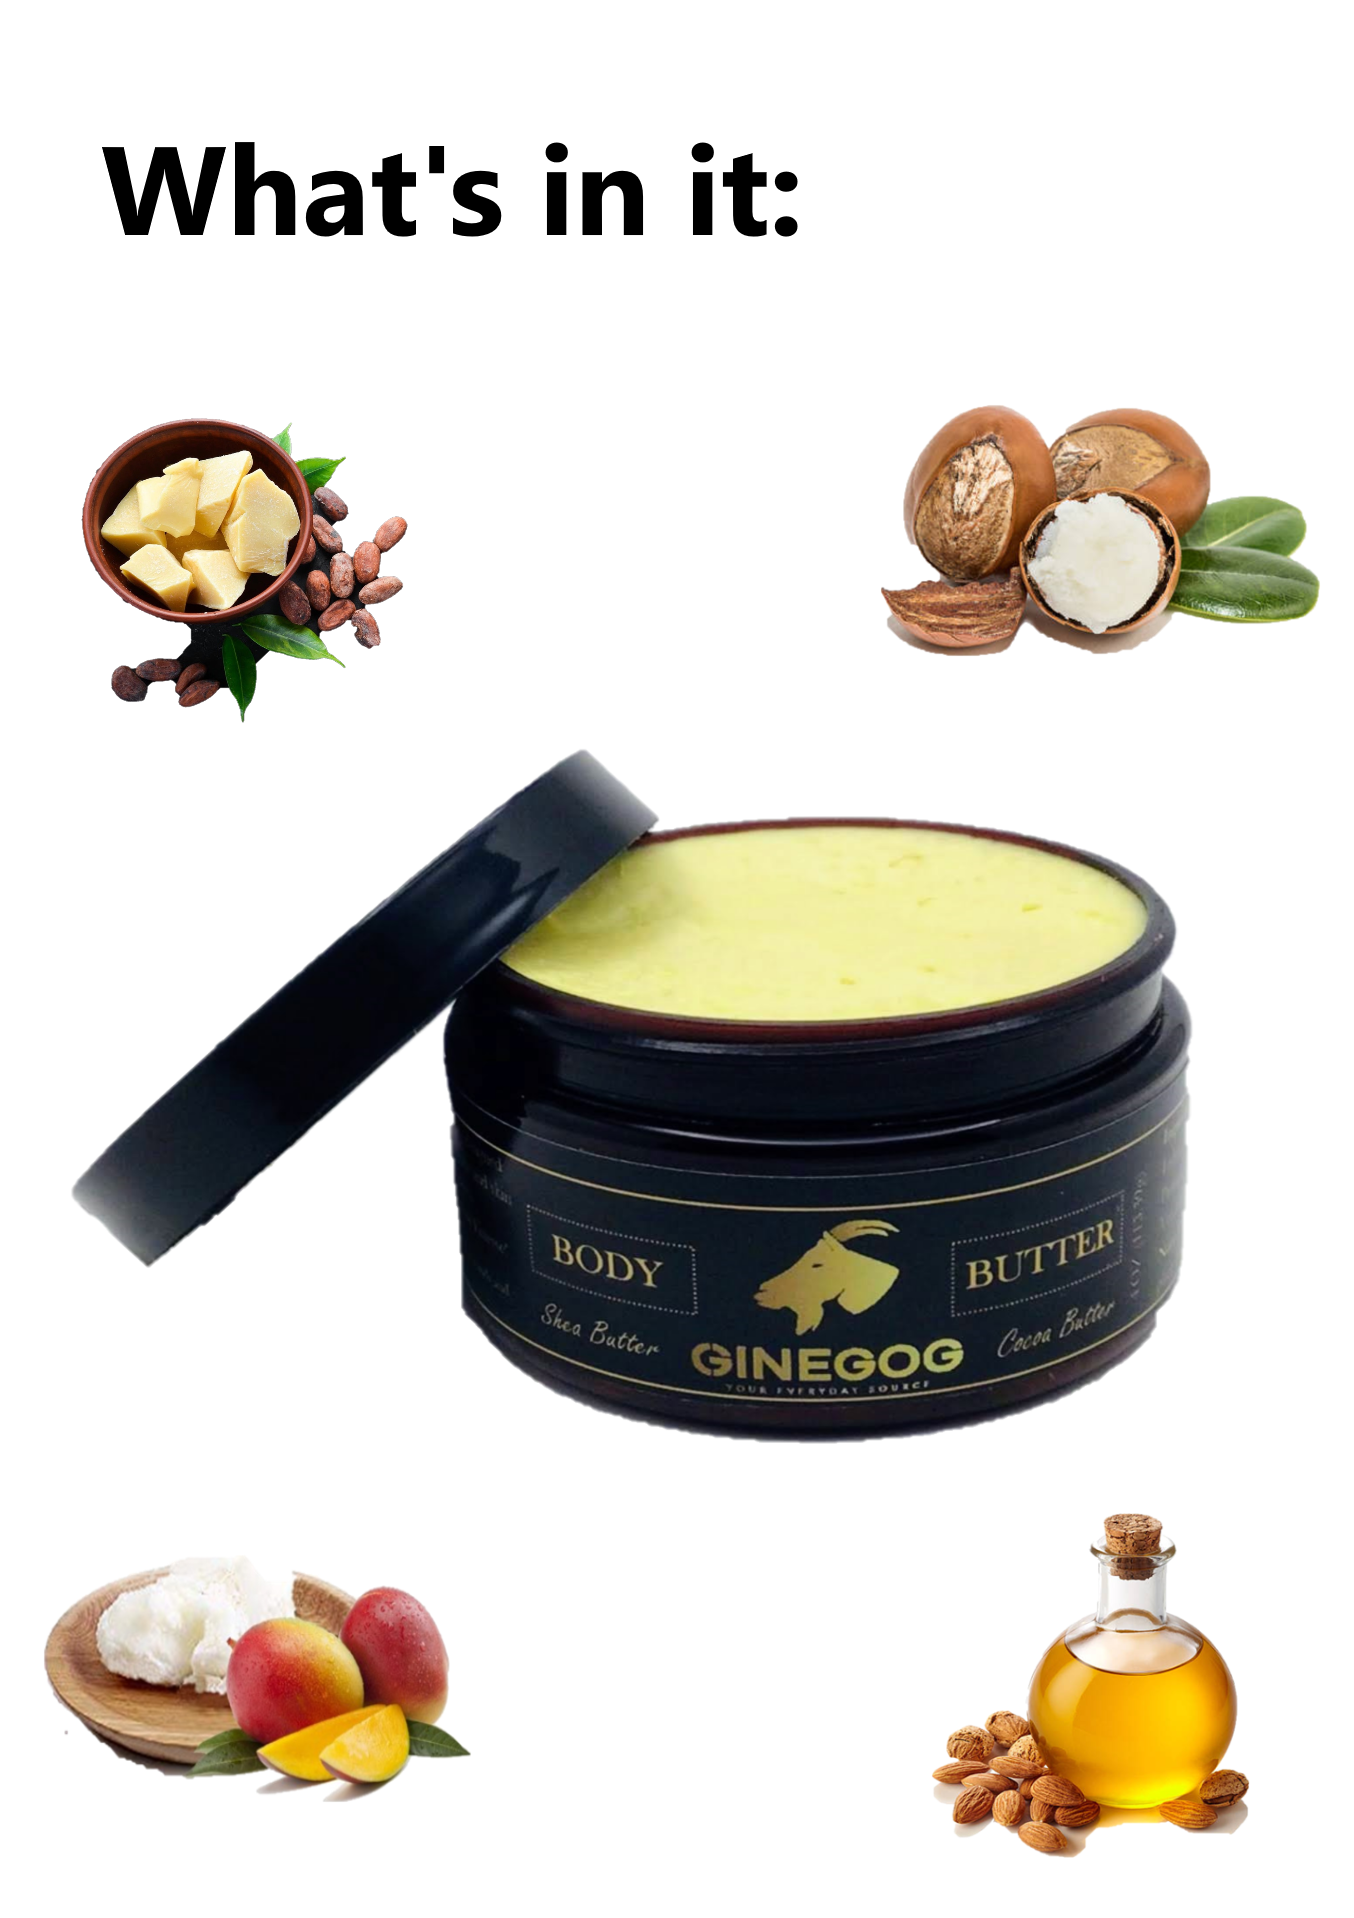 GINEGOG BODY BUTTER with Shea Butter & Cocoa Butter